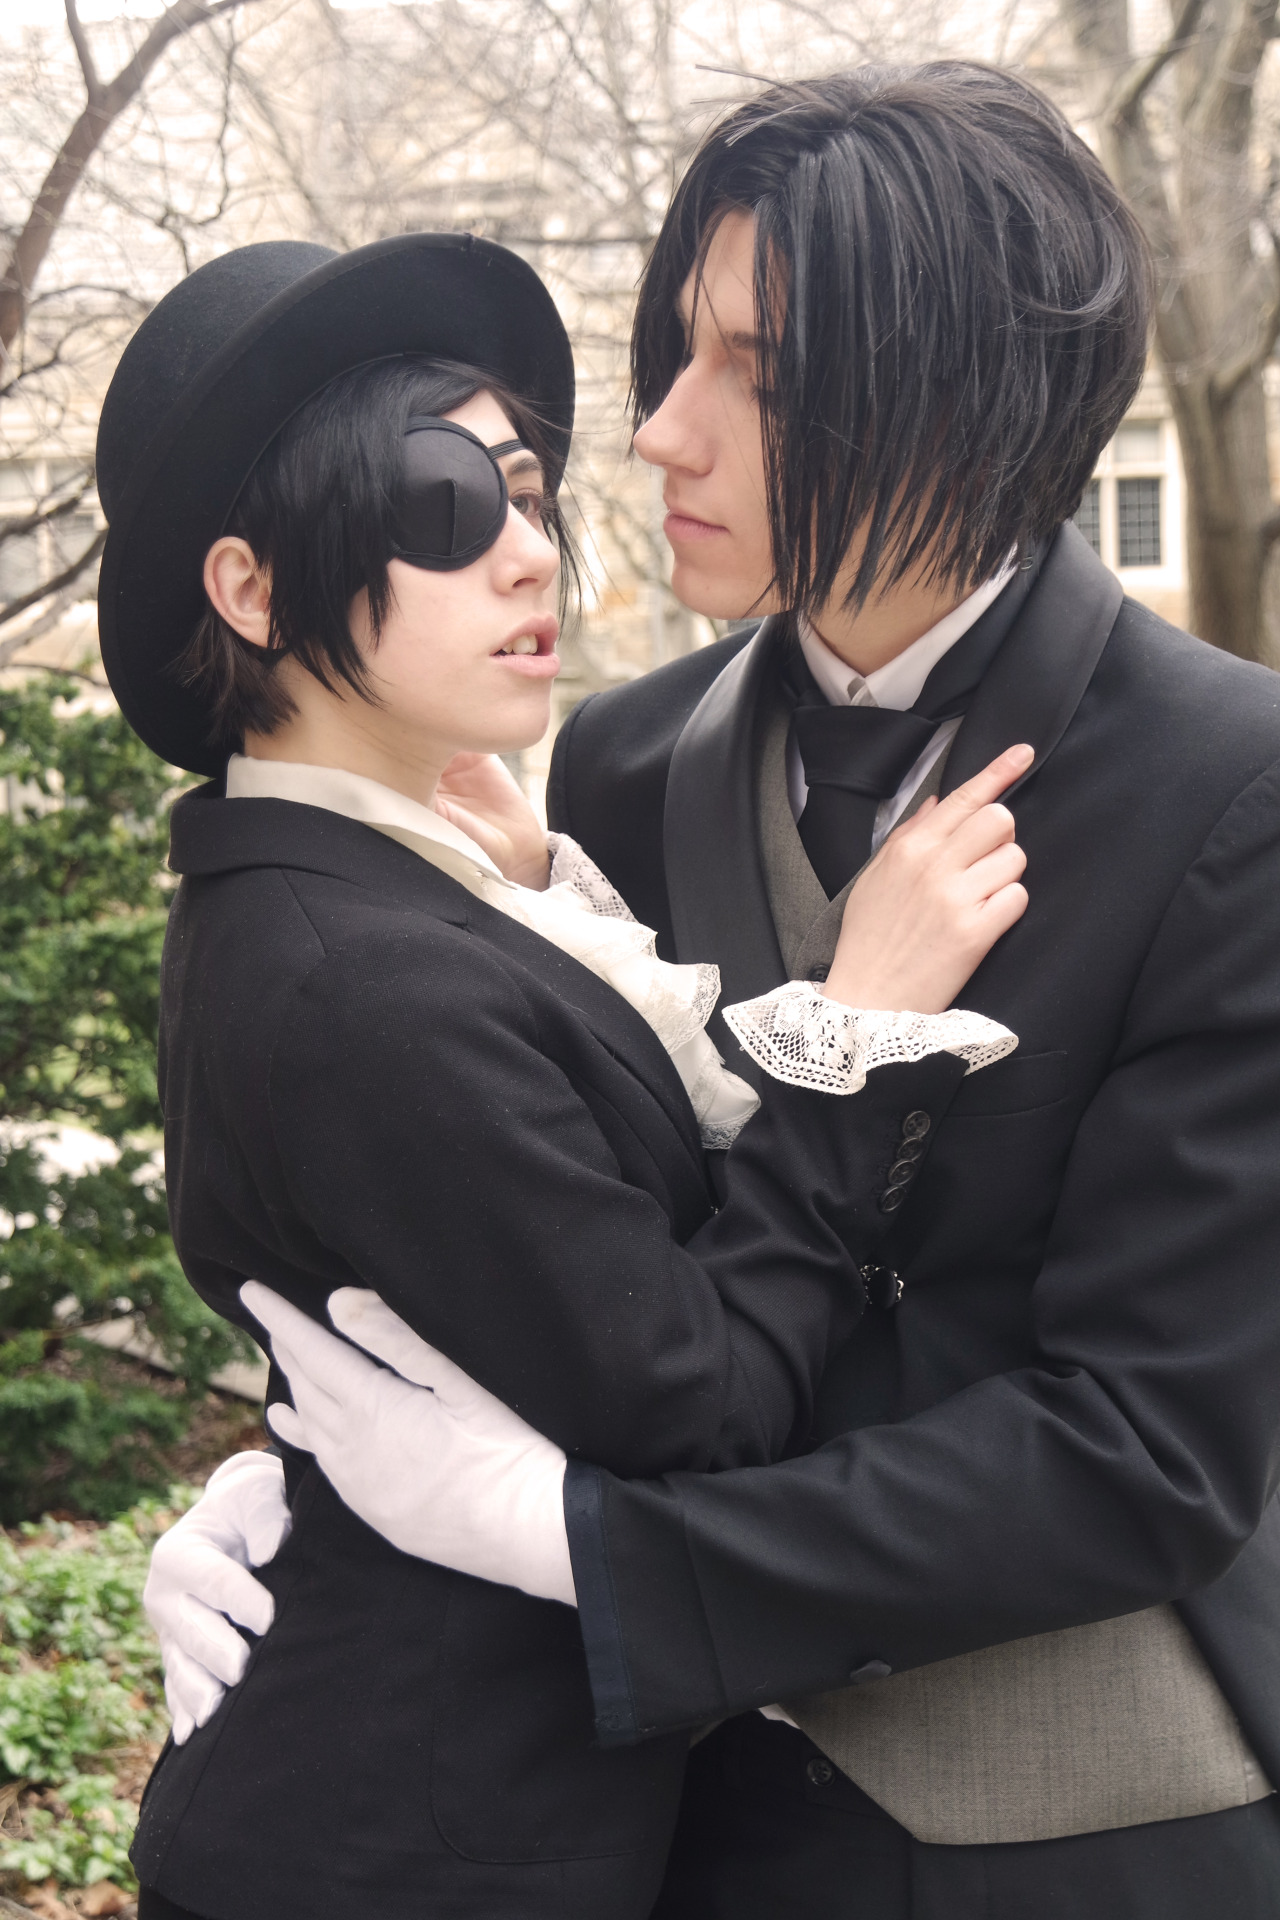 Anime Cosplay Couple by seeseeworld on DeviantArt